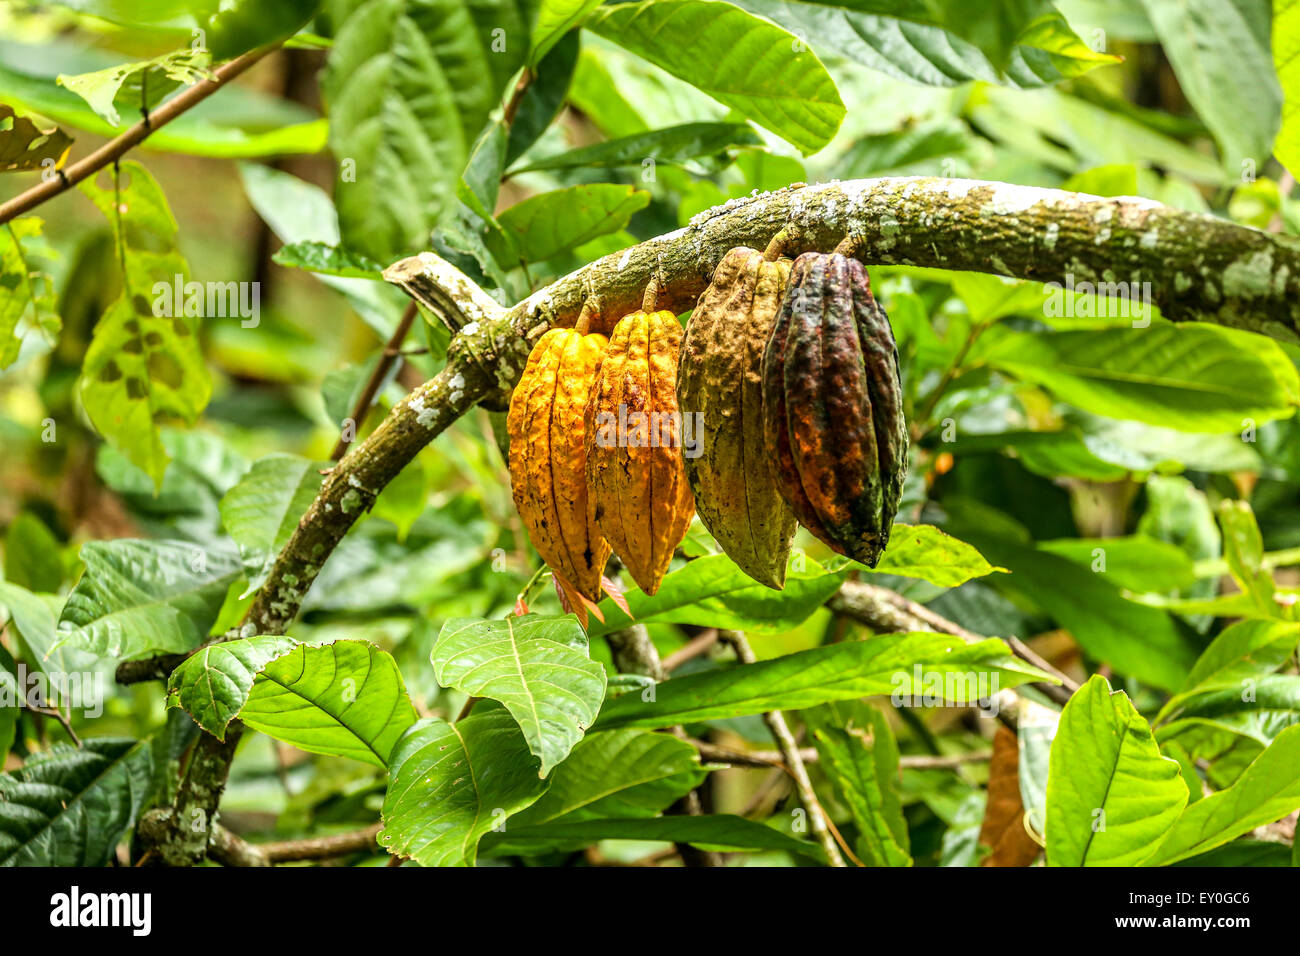 Yellow, brown , orange and green cacao beans hanging from the branch of green 'Theobroma cacao' tree in Bali, Indonesia Stock Photo